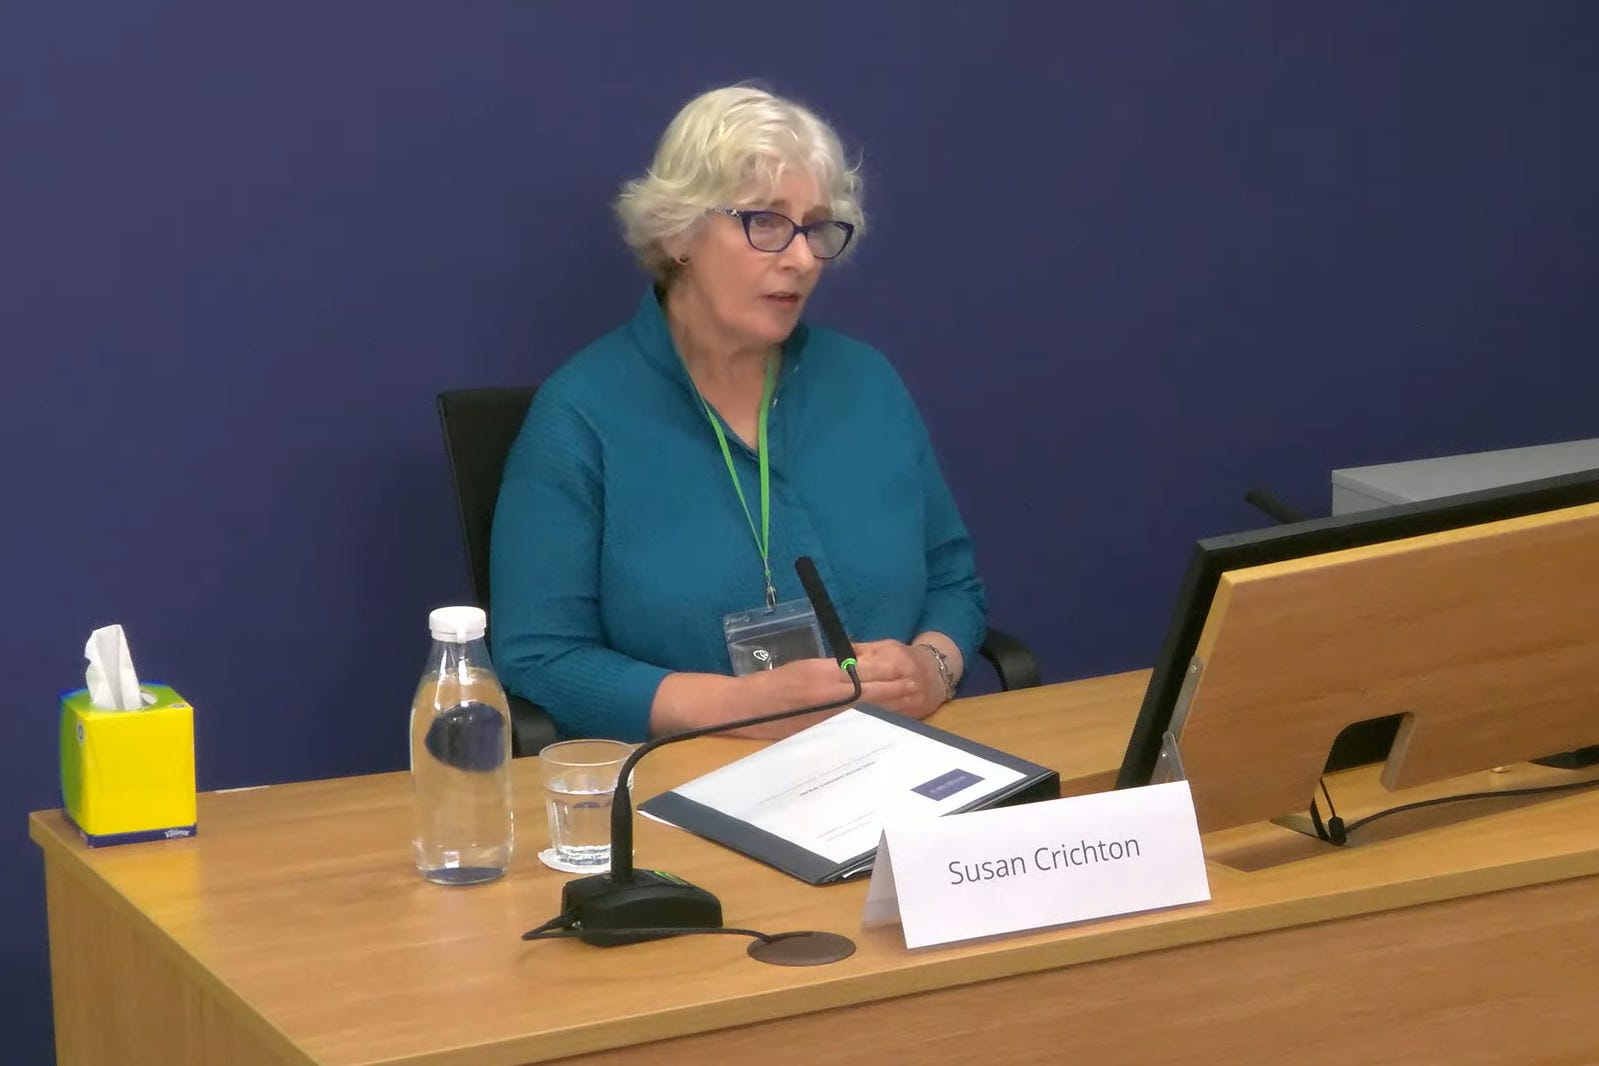 Susan Crichton, former company secretary and general counsel of Post Office Ltd, giving evidence